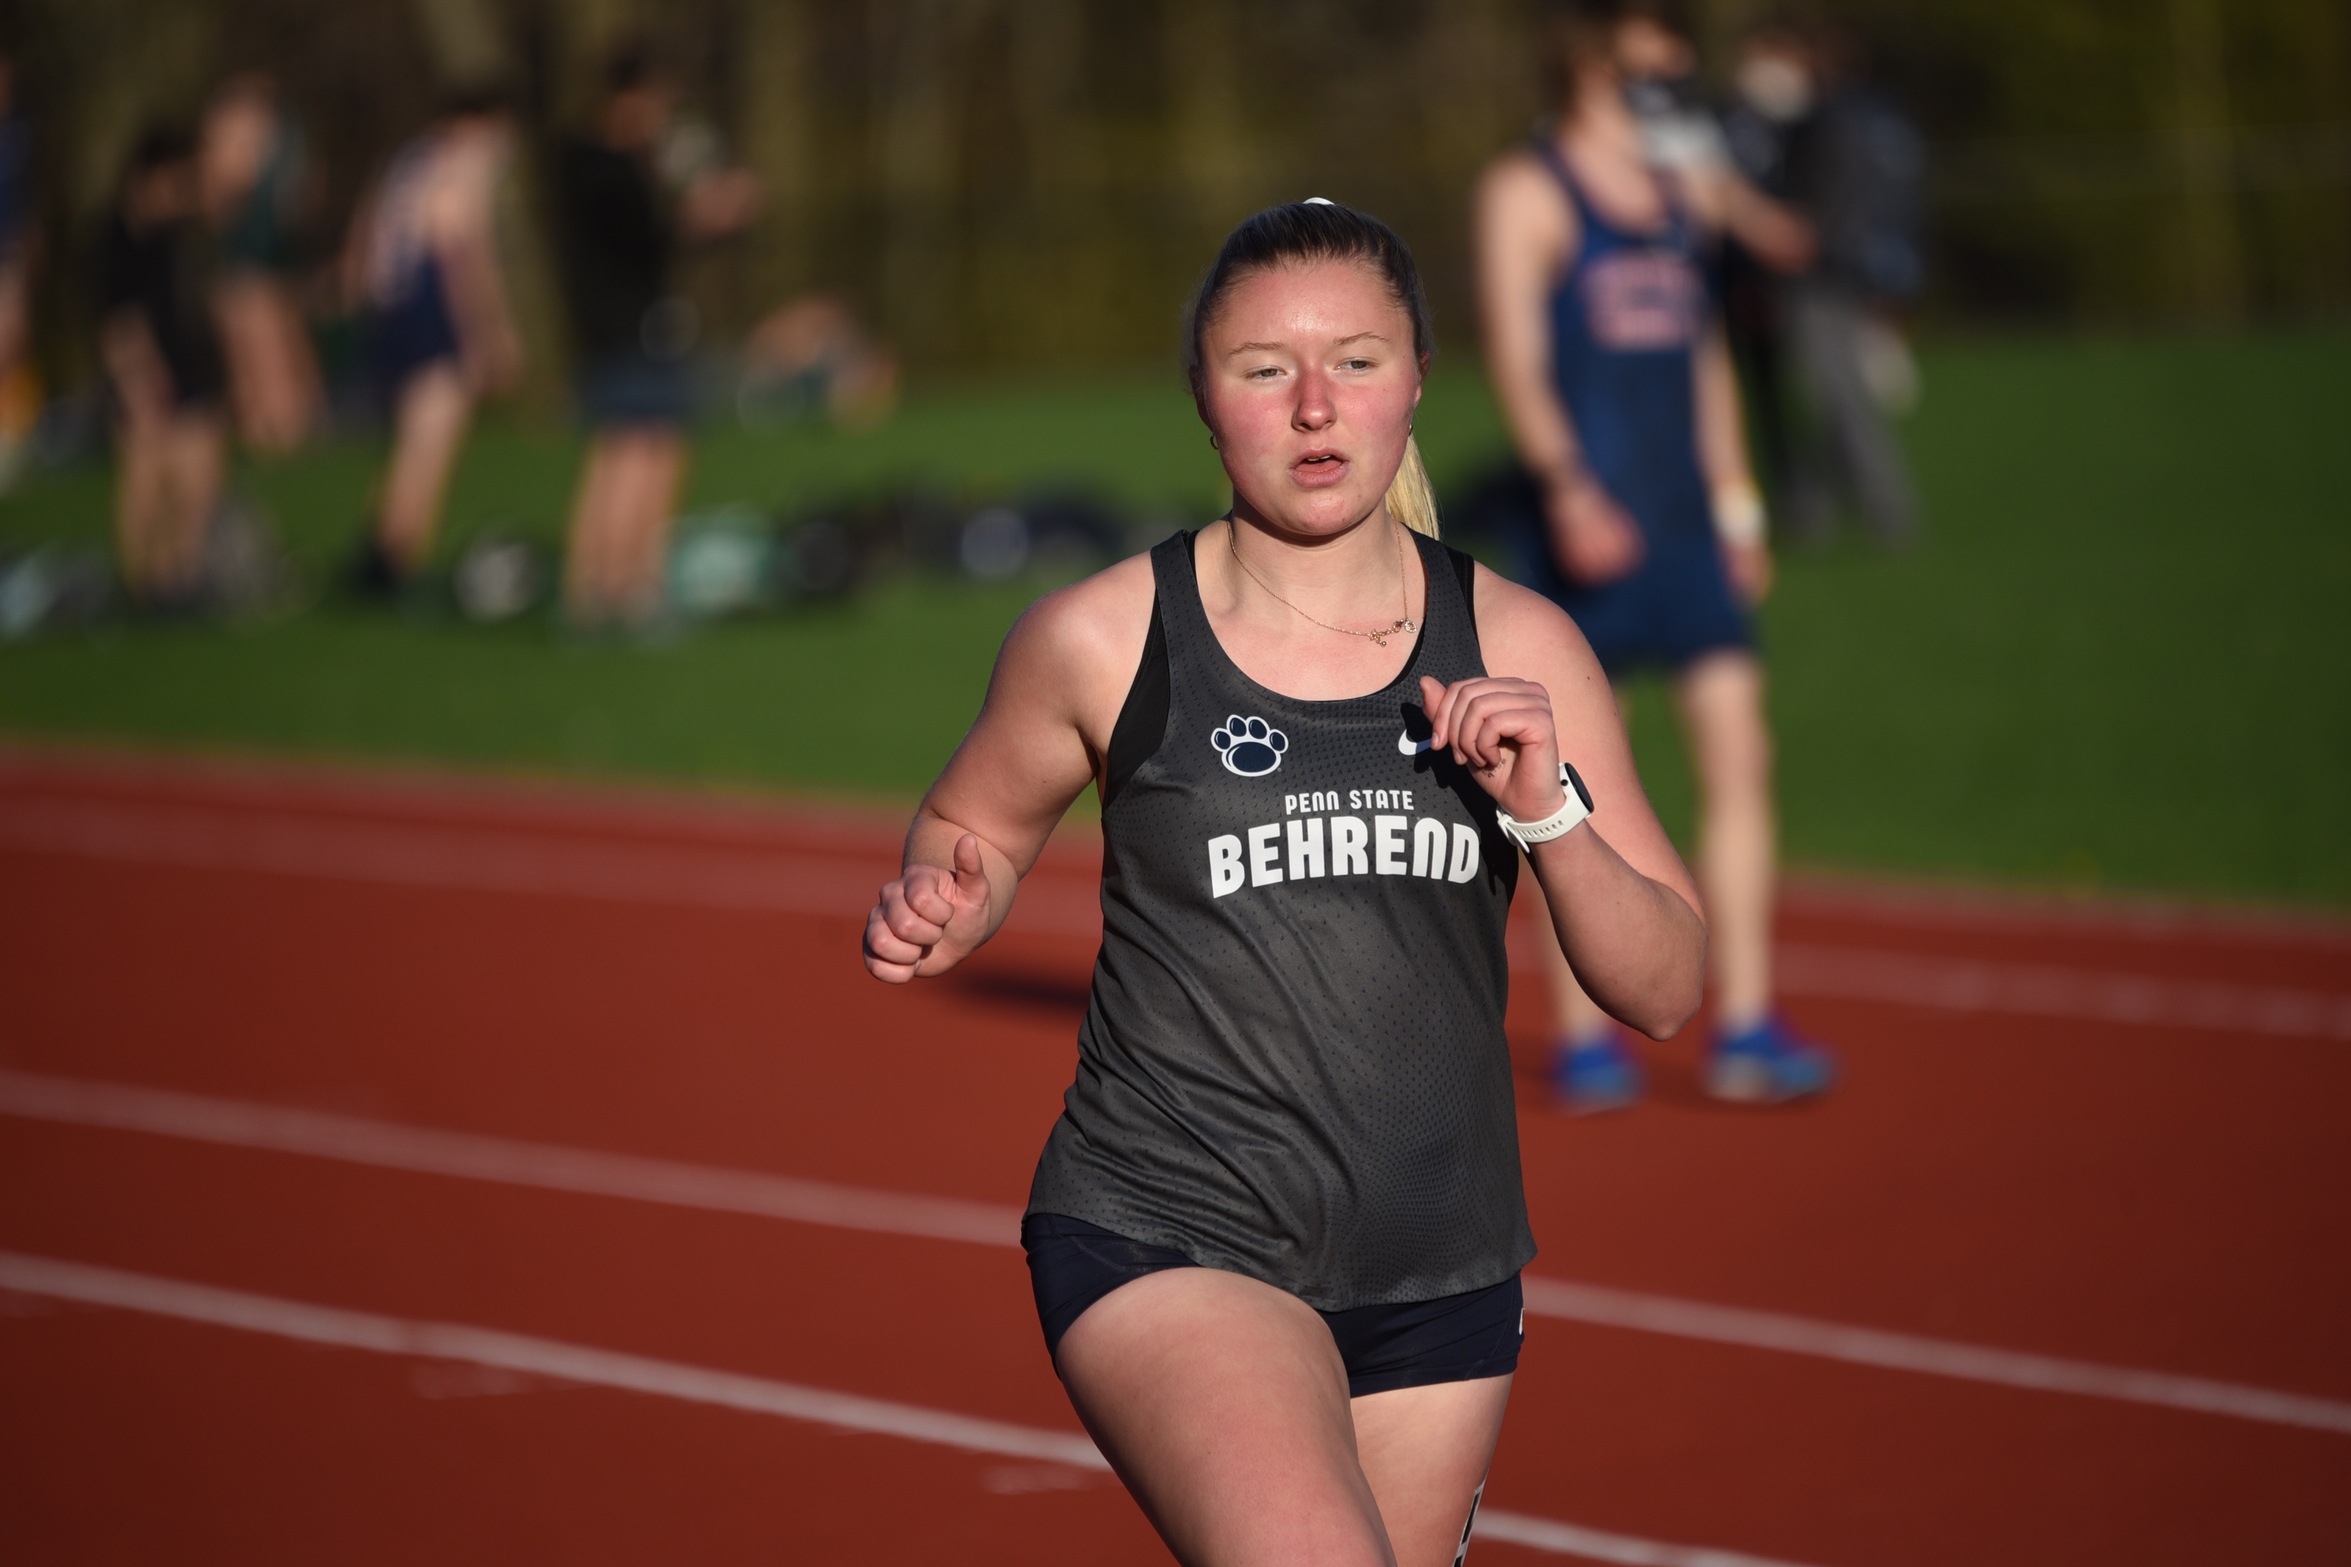 Nola Registers Another AARTFC-Qualifying Mark as Behrend Competes at Thiel